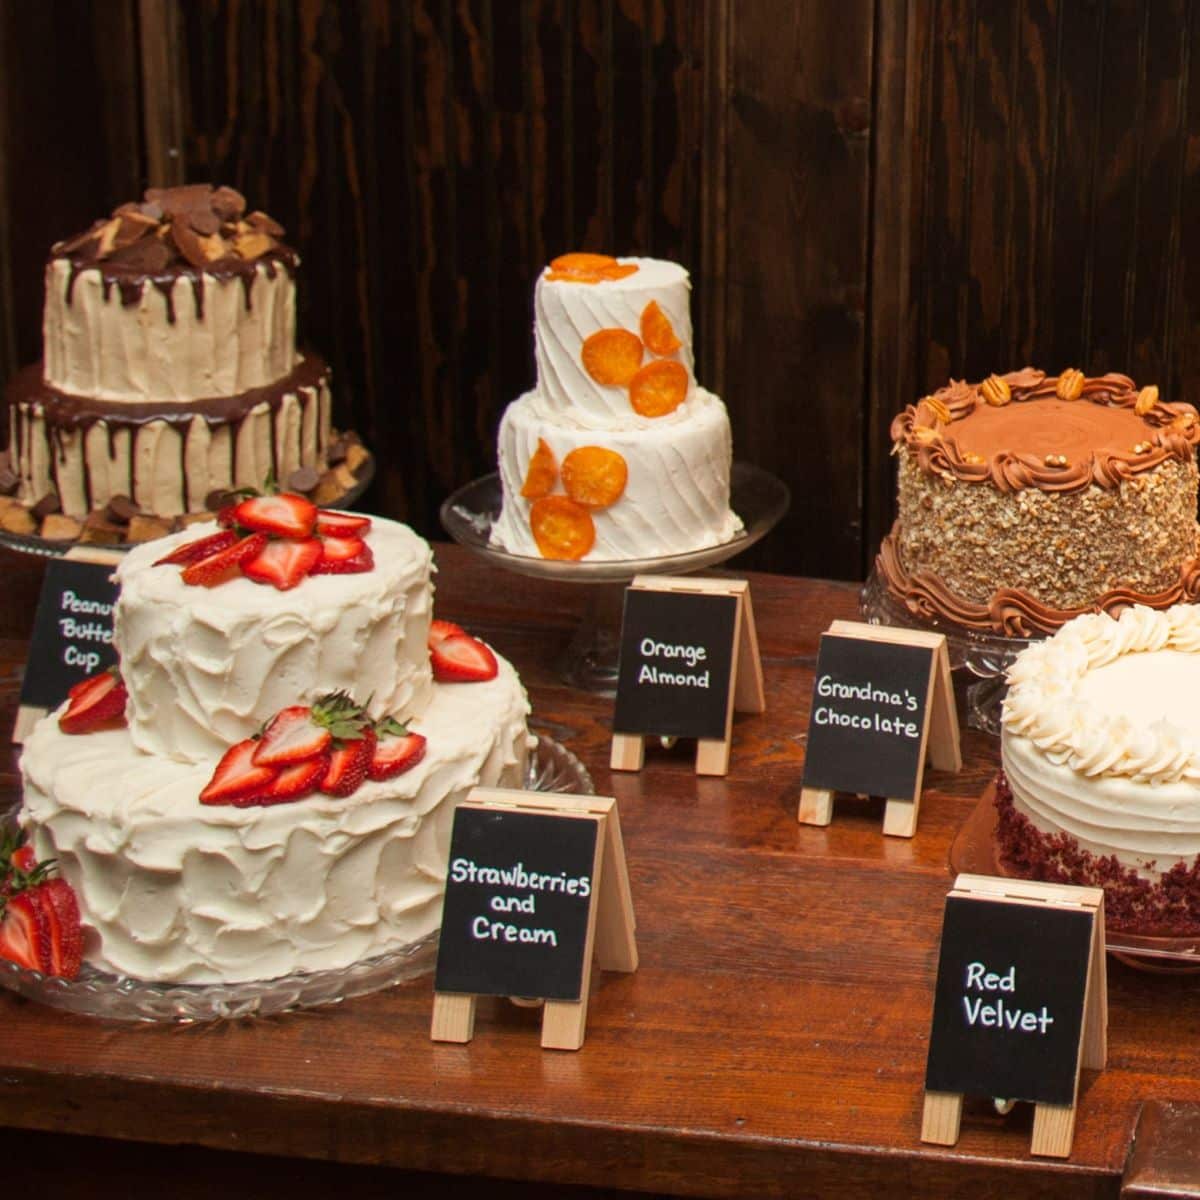 table with several different wedding cake flavors and recipes.